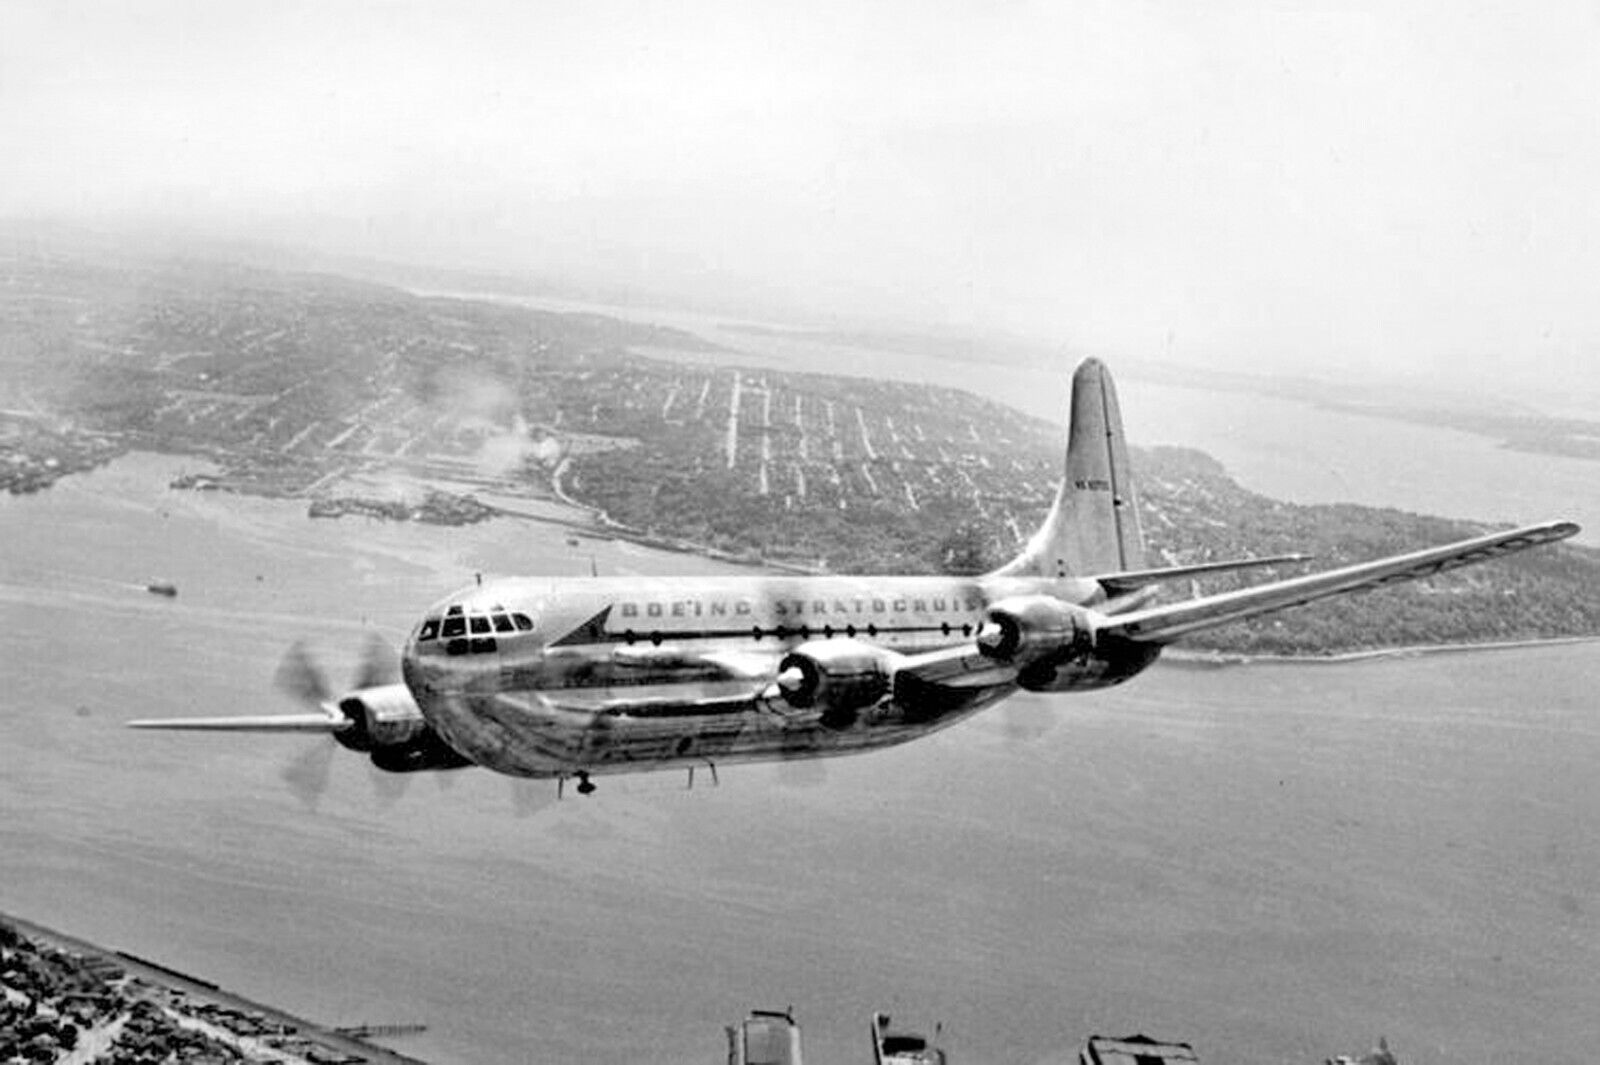 What Do You Know About The Historical Boeing 377 Stratocruiser?